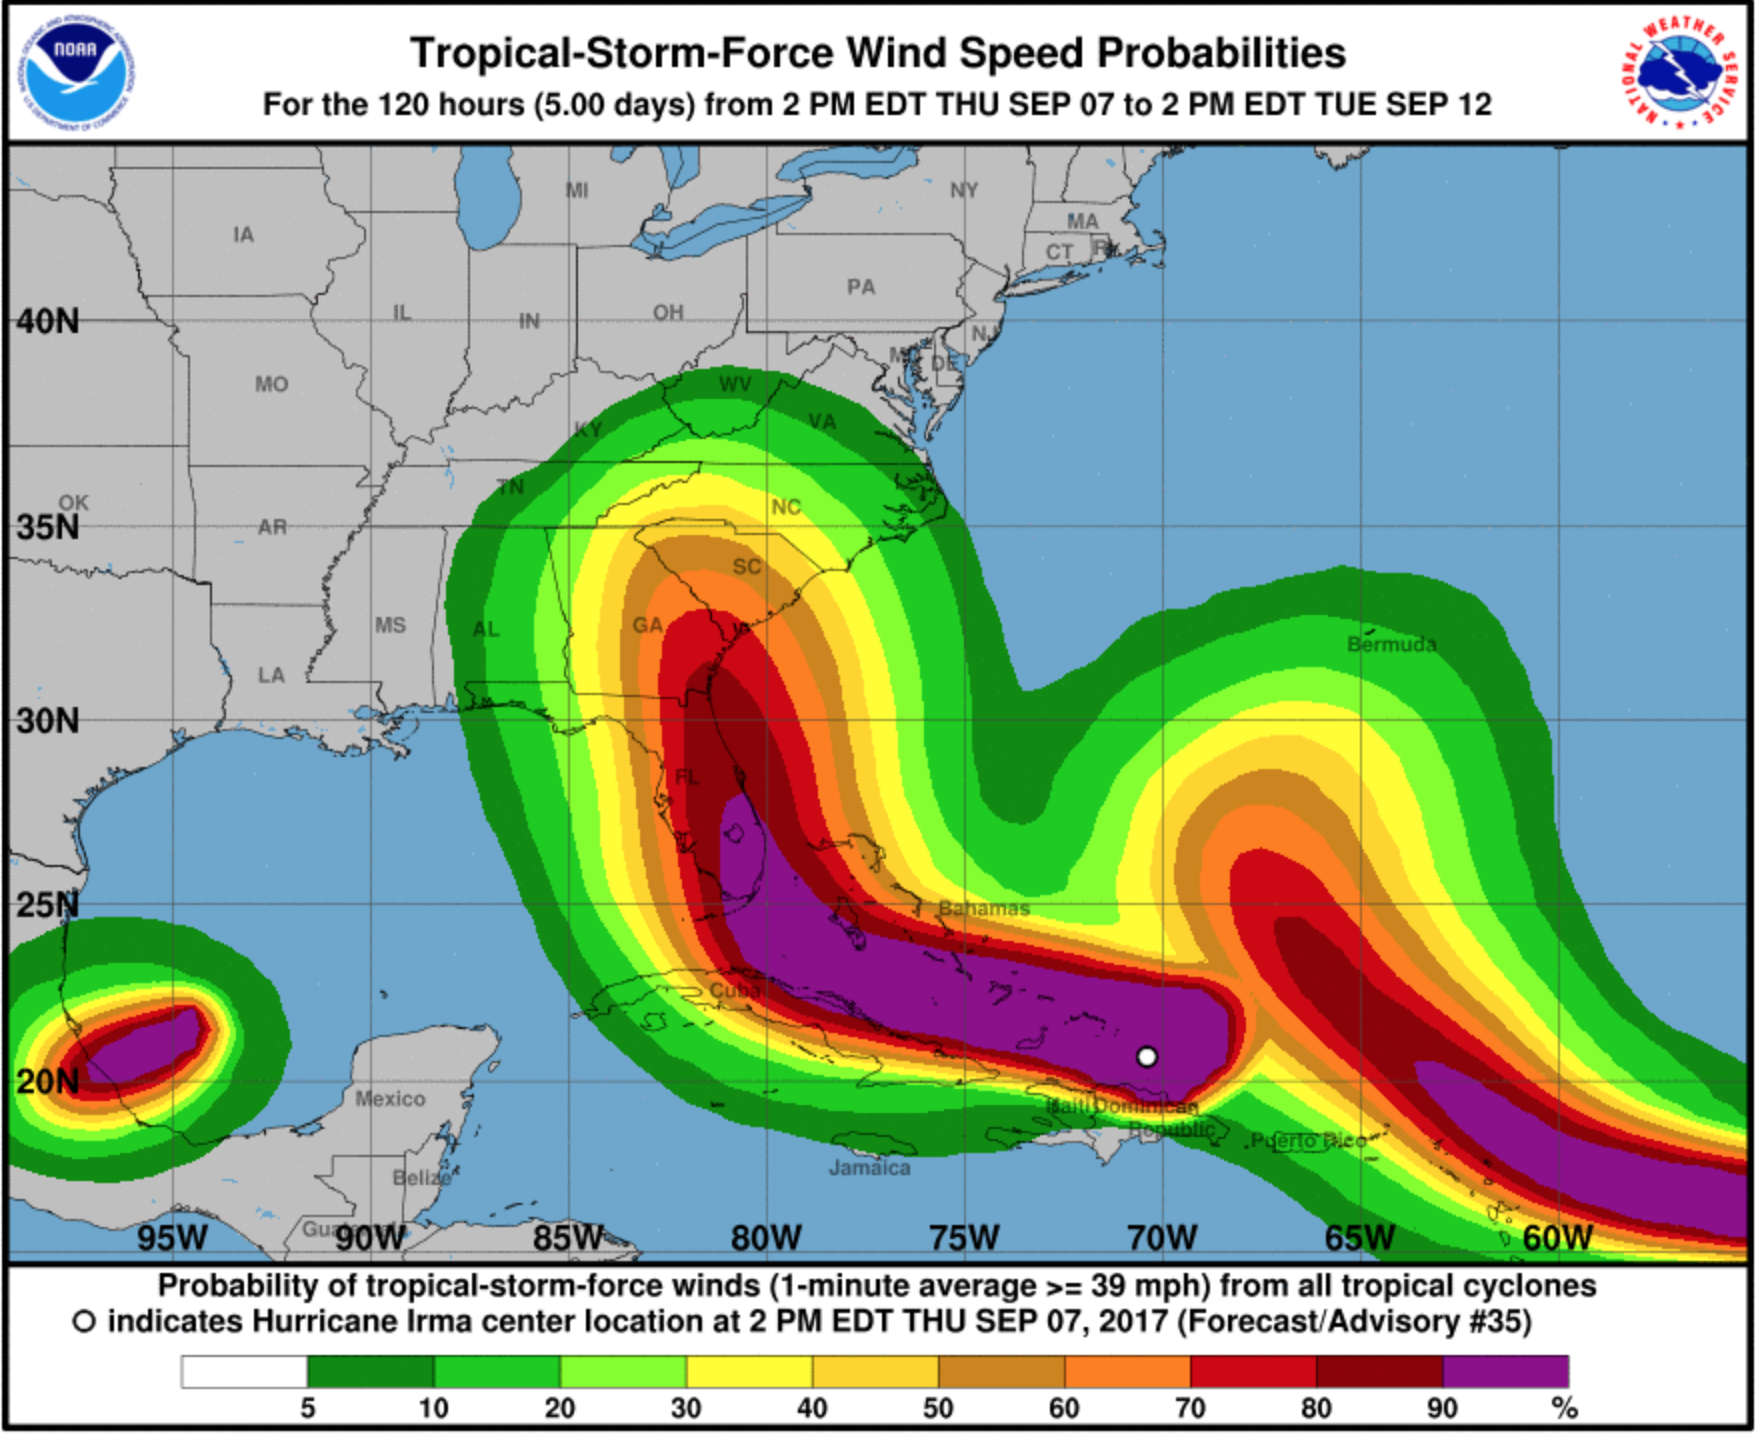 Tropical-storm-force wind speed probabilities from 2 p.m. Thursday, Sept. 7 to 2 p.m. Sept. 12. Photo courtesy of NWS National Hurricane Center